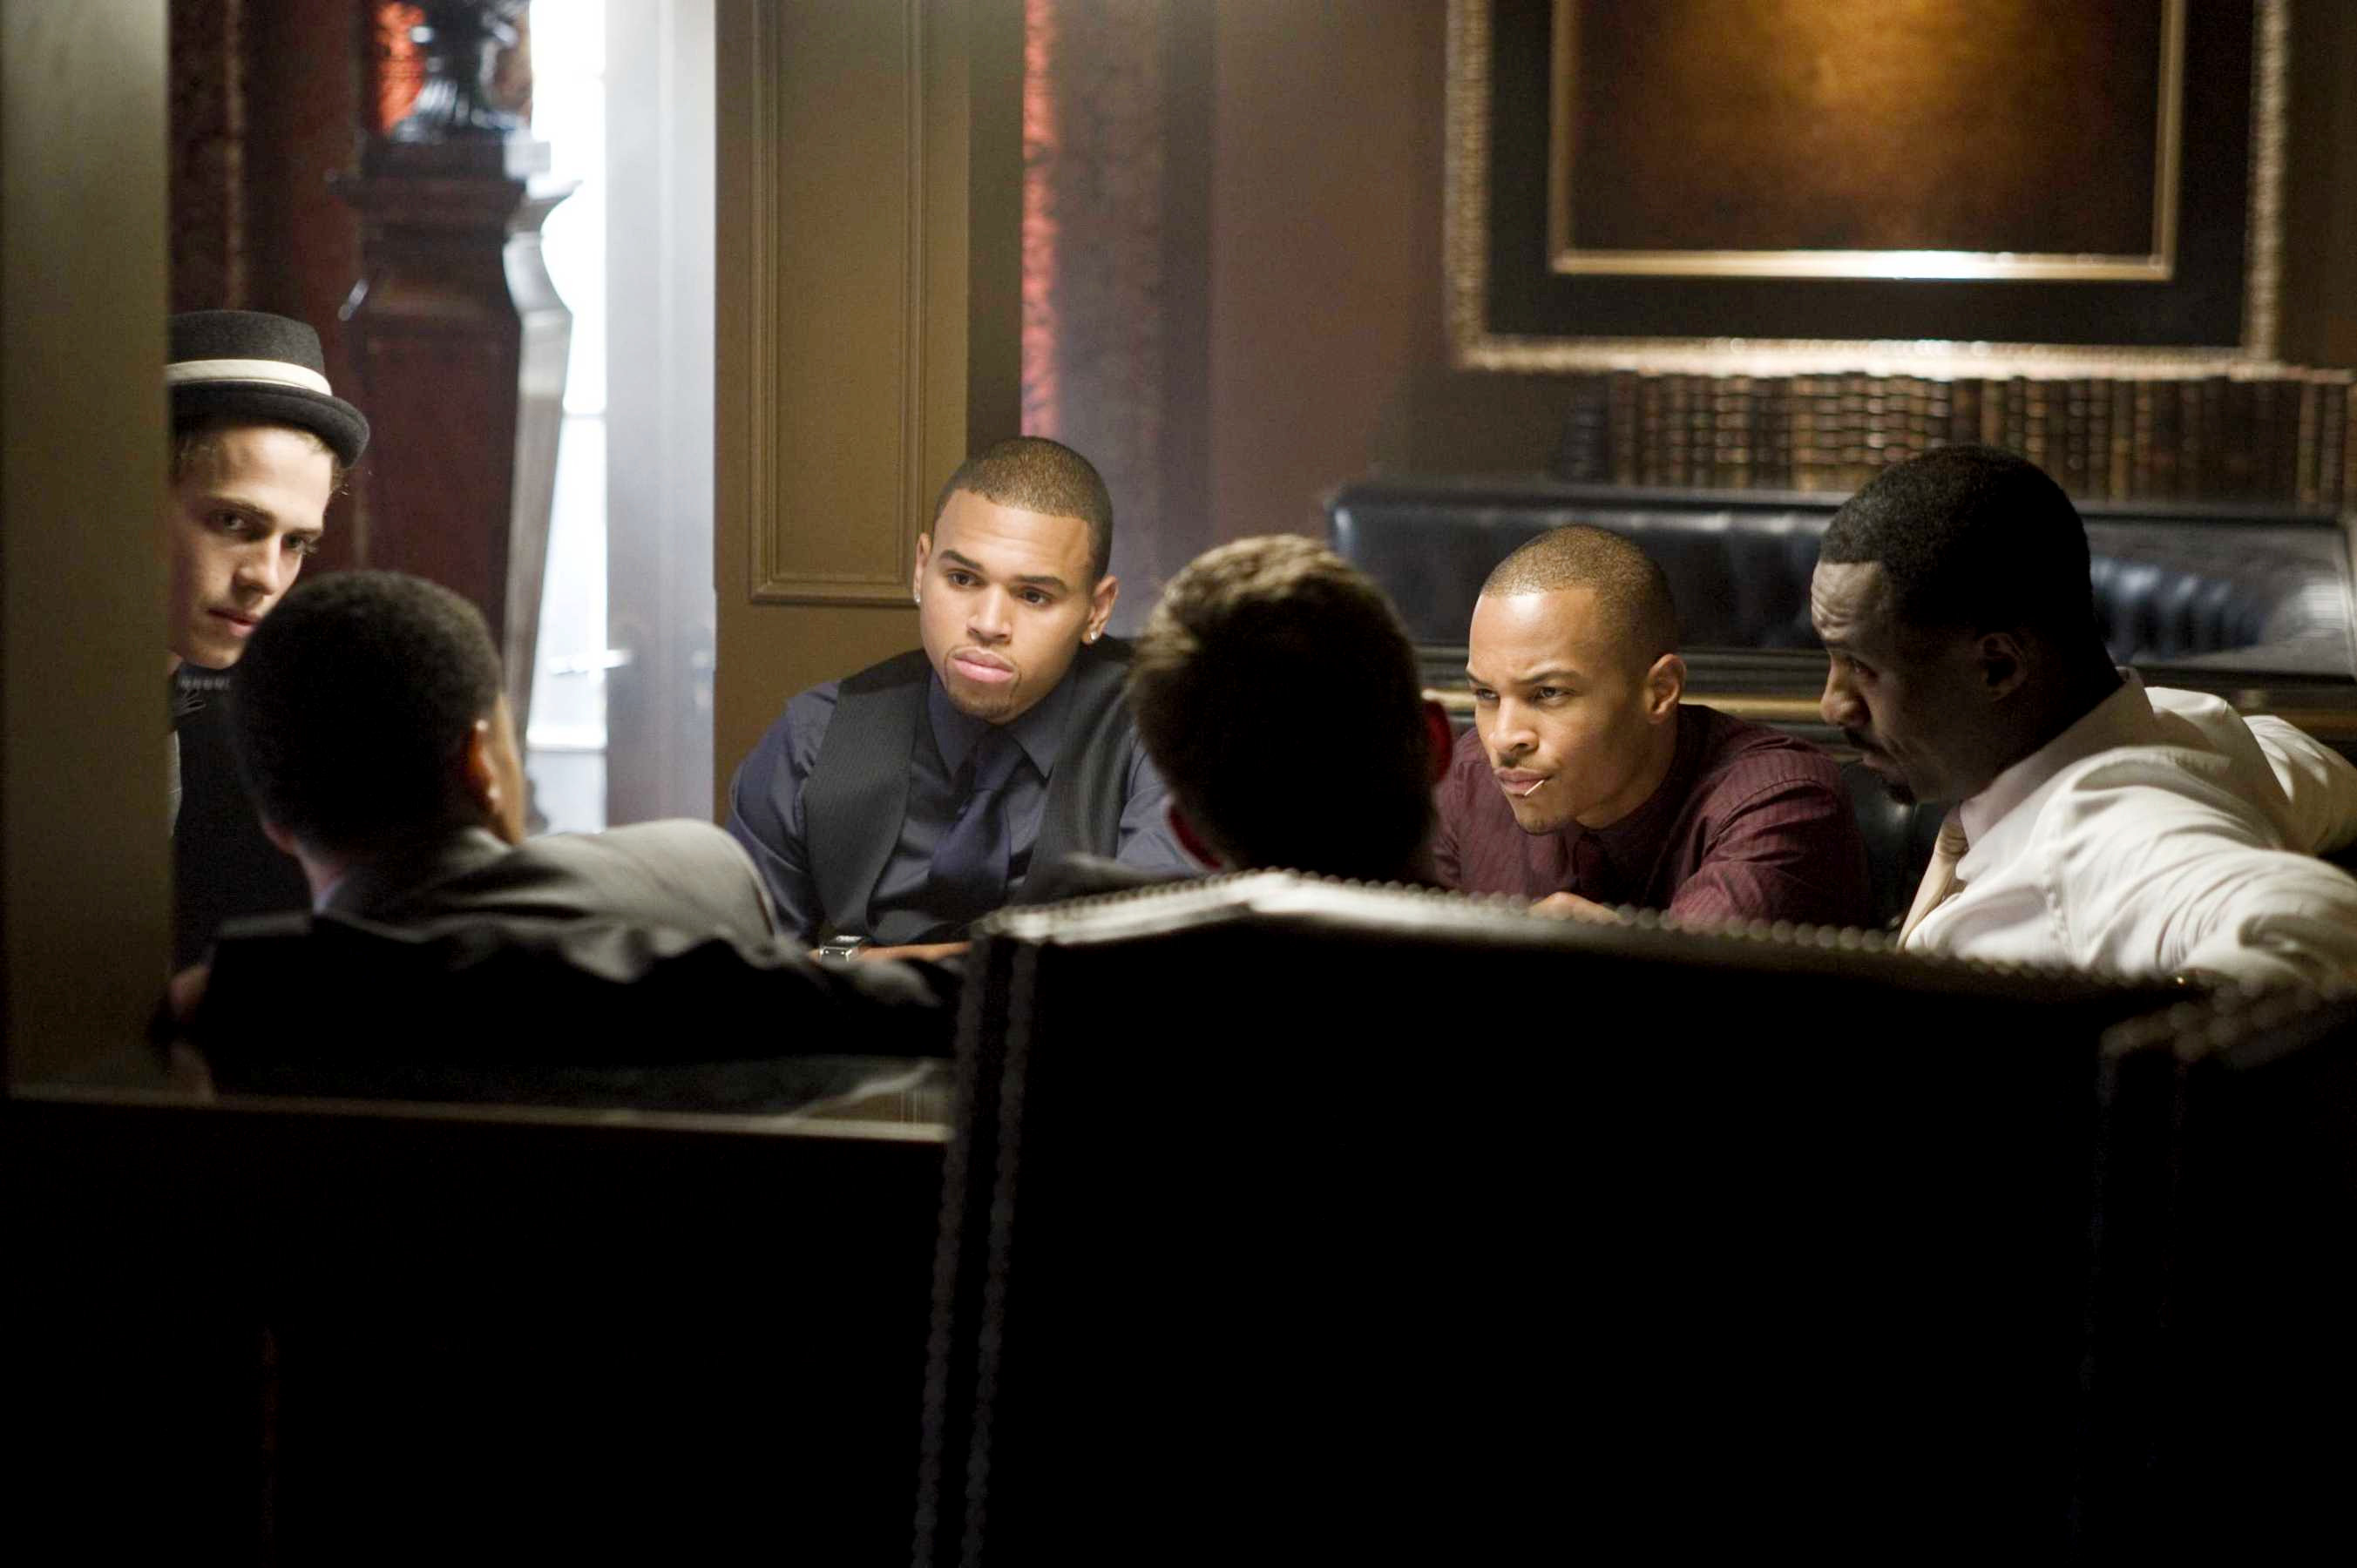 Chris Brown stars as Jesse Attica and T.I. stars as Ghost in Screen Gems' Takers (2010)